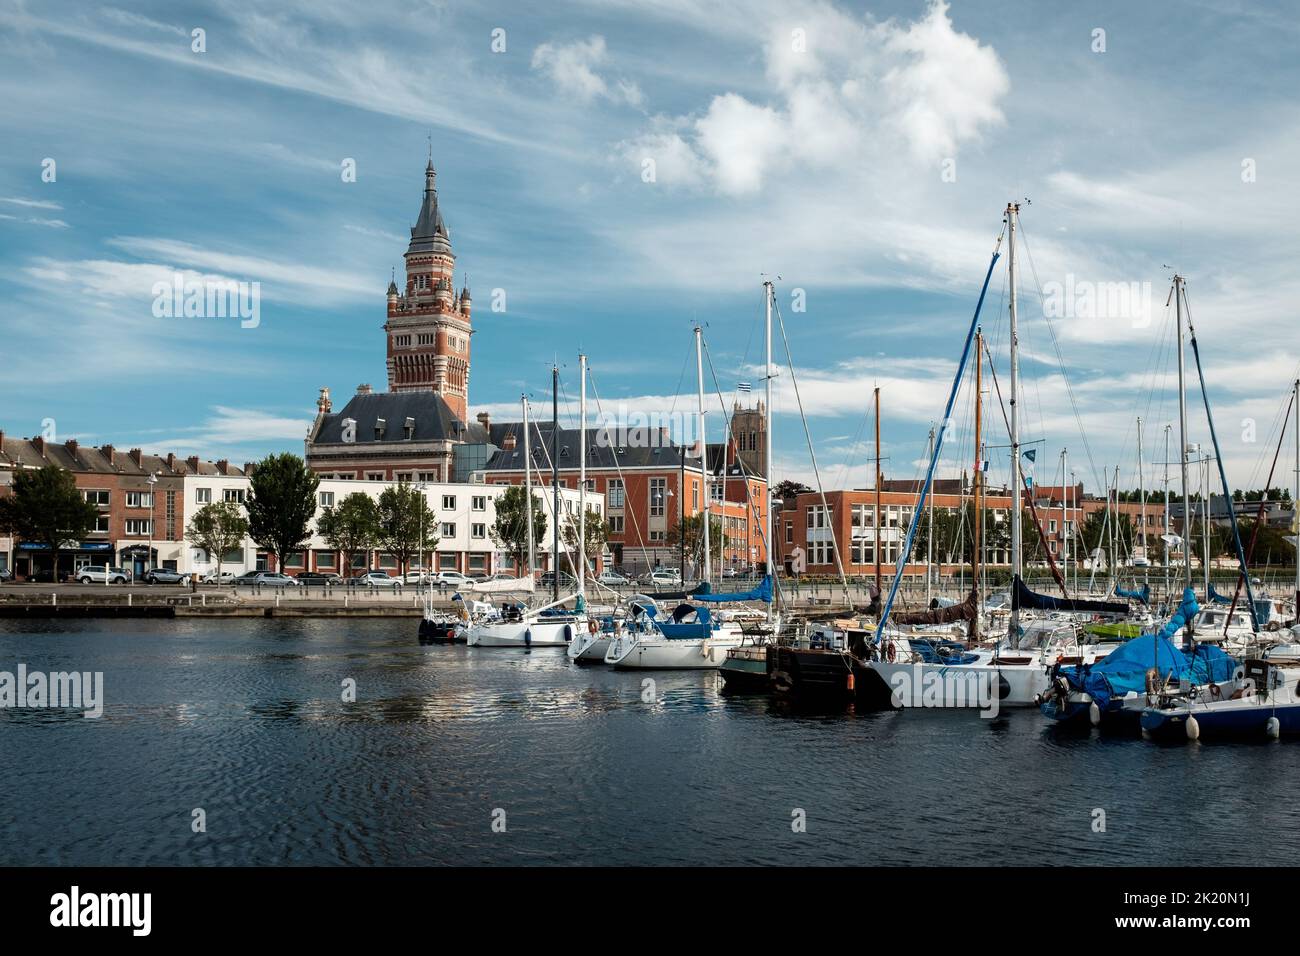 Dunkirk, France - 26 July 2020: View on the town hall and bellfry from accross the marina called 'Bassin du Commerce' Stock Photo